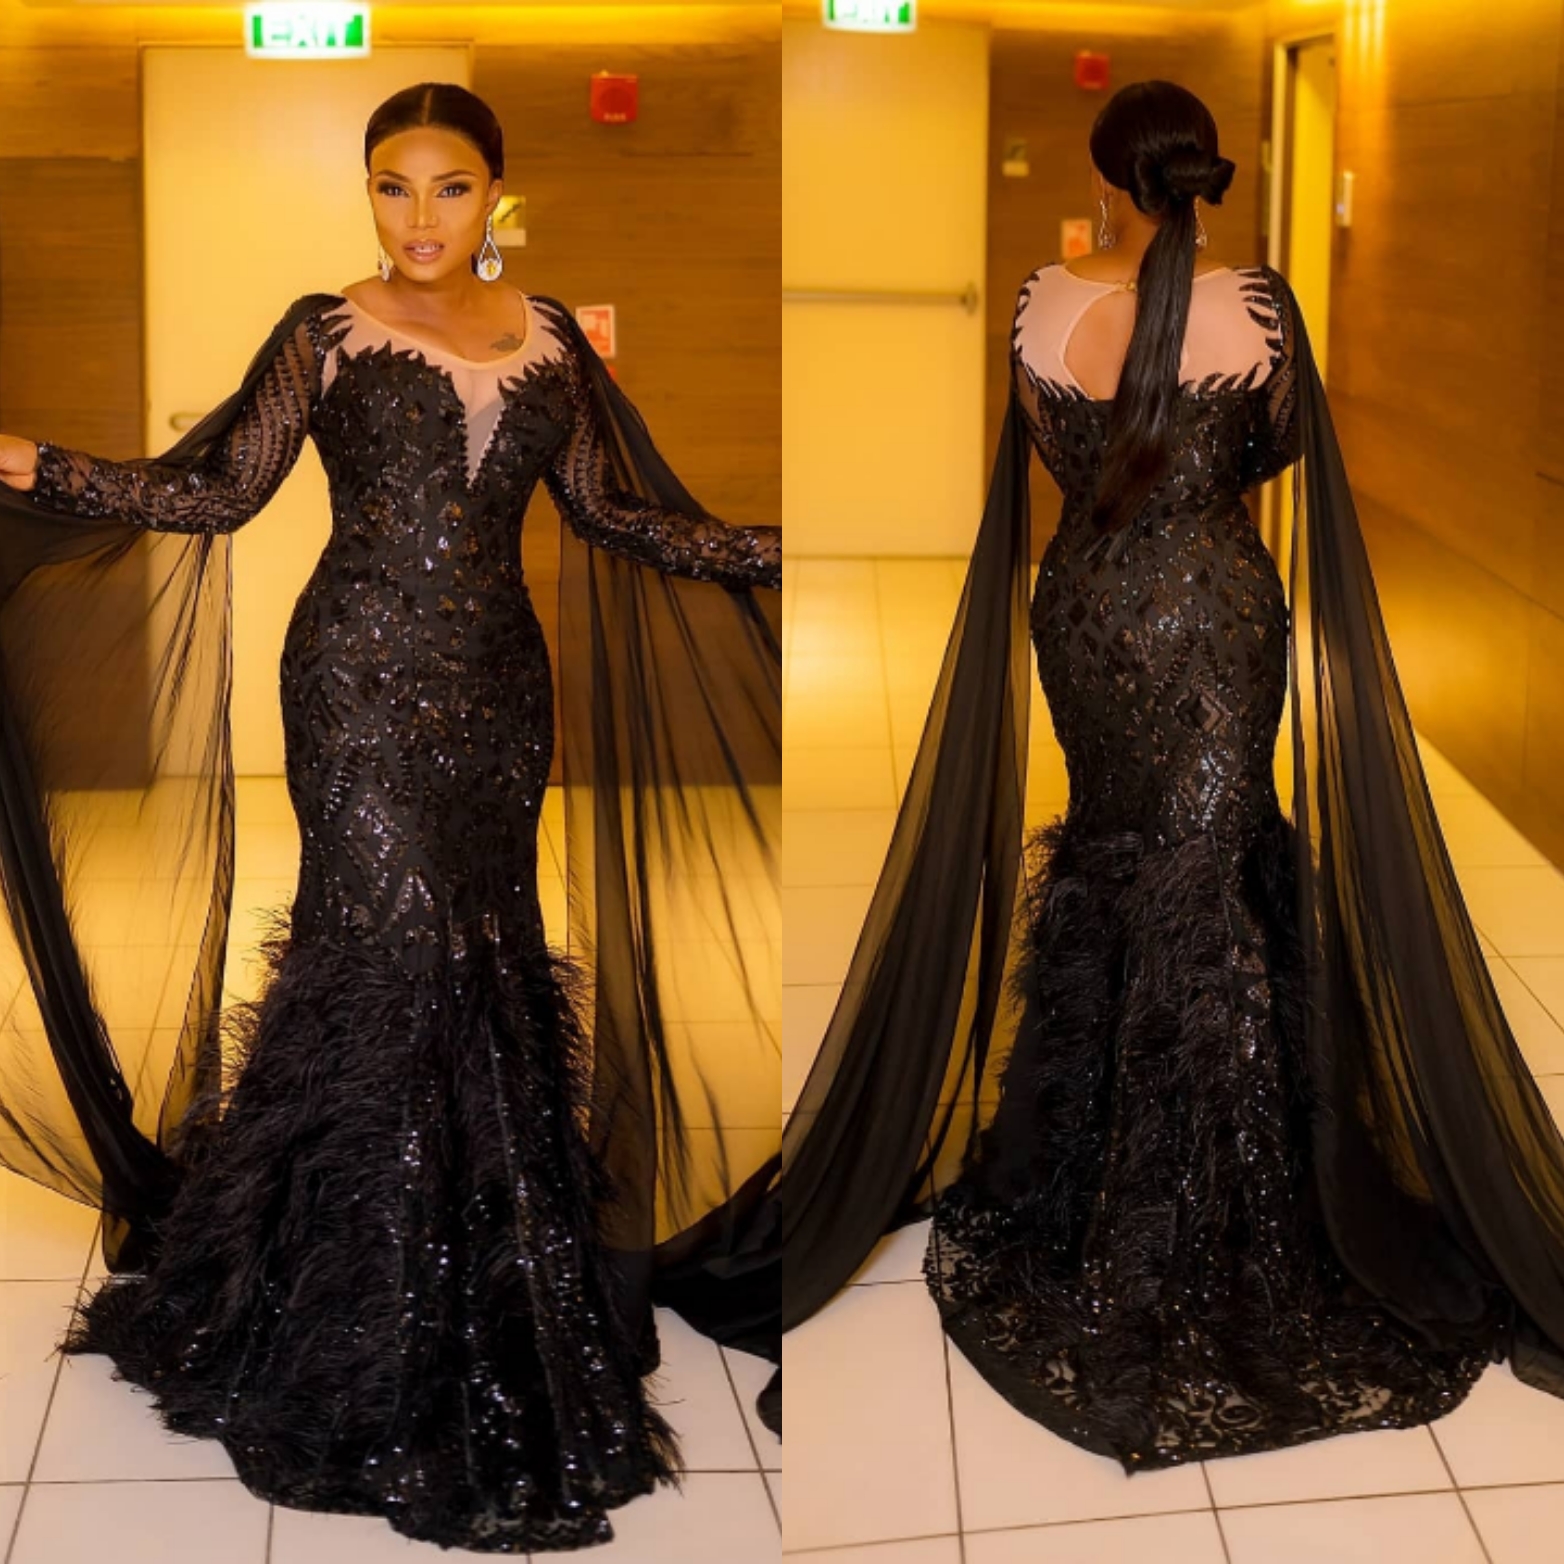 2018-amvcas-the-most-rave-worthy-looks-on-the-ladies-theravelist